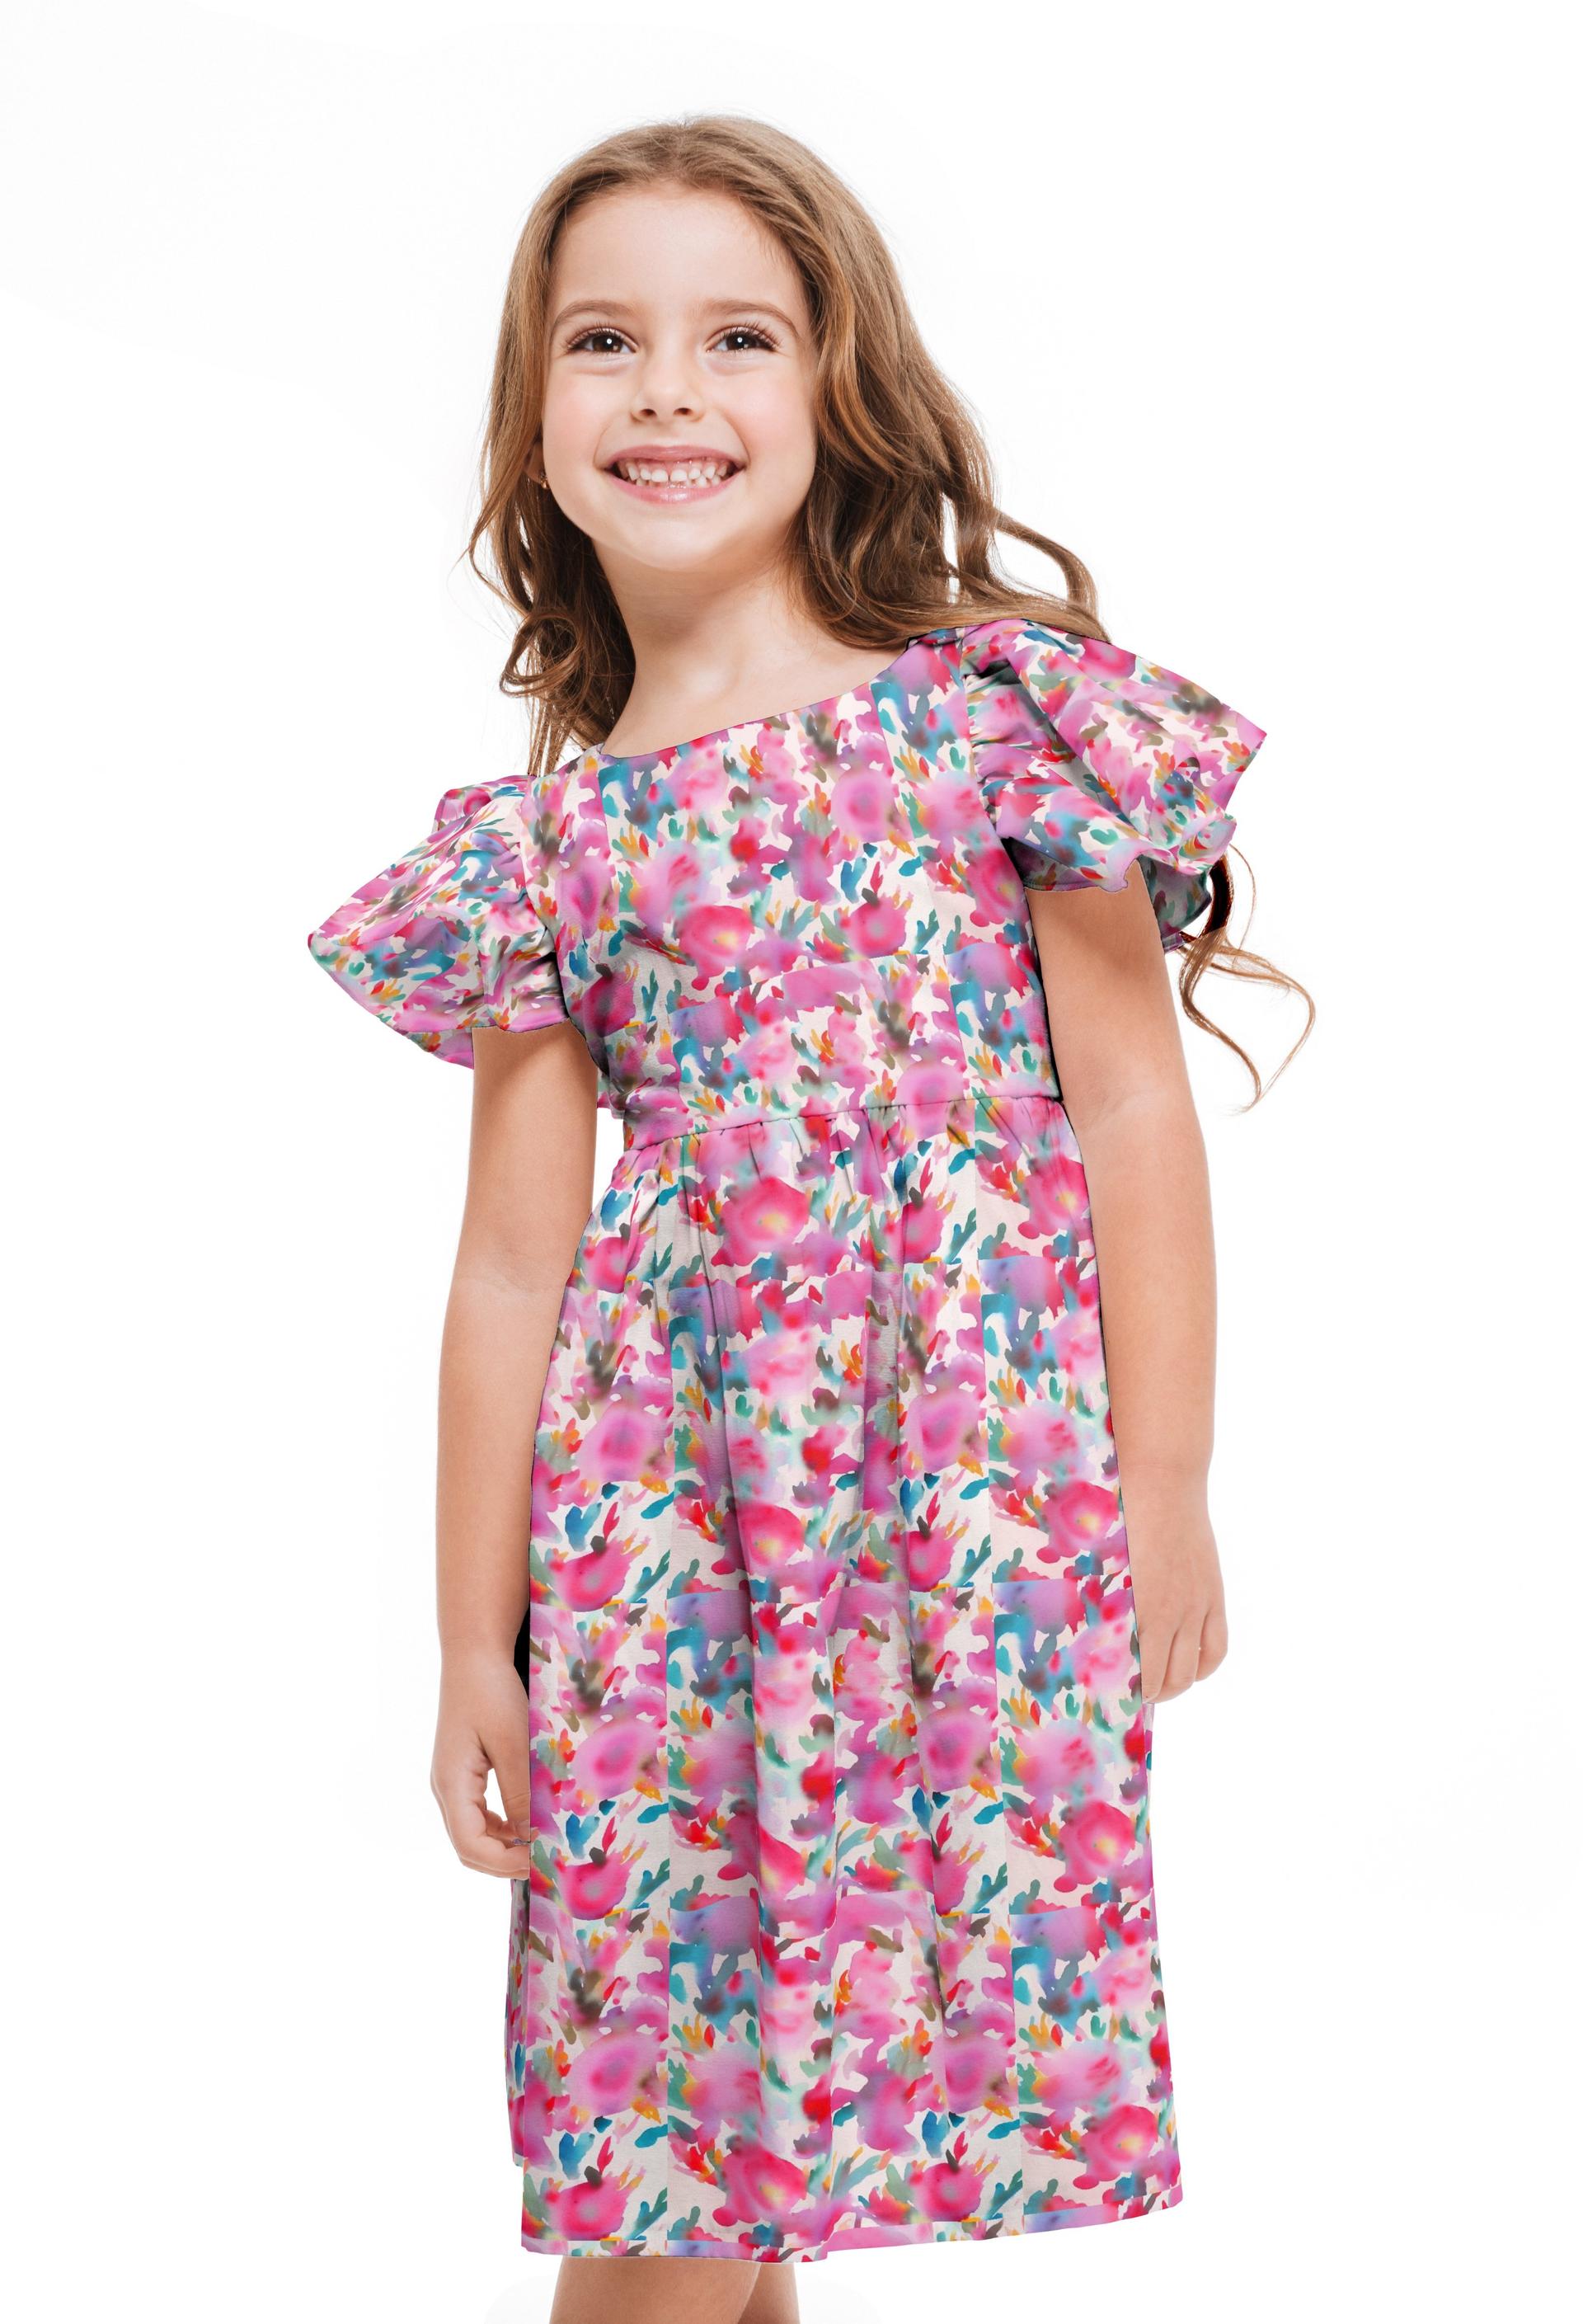 Image of small girl wearing a dress